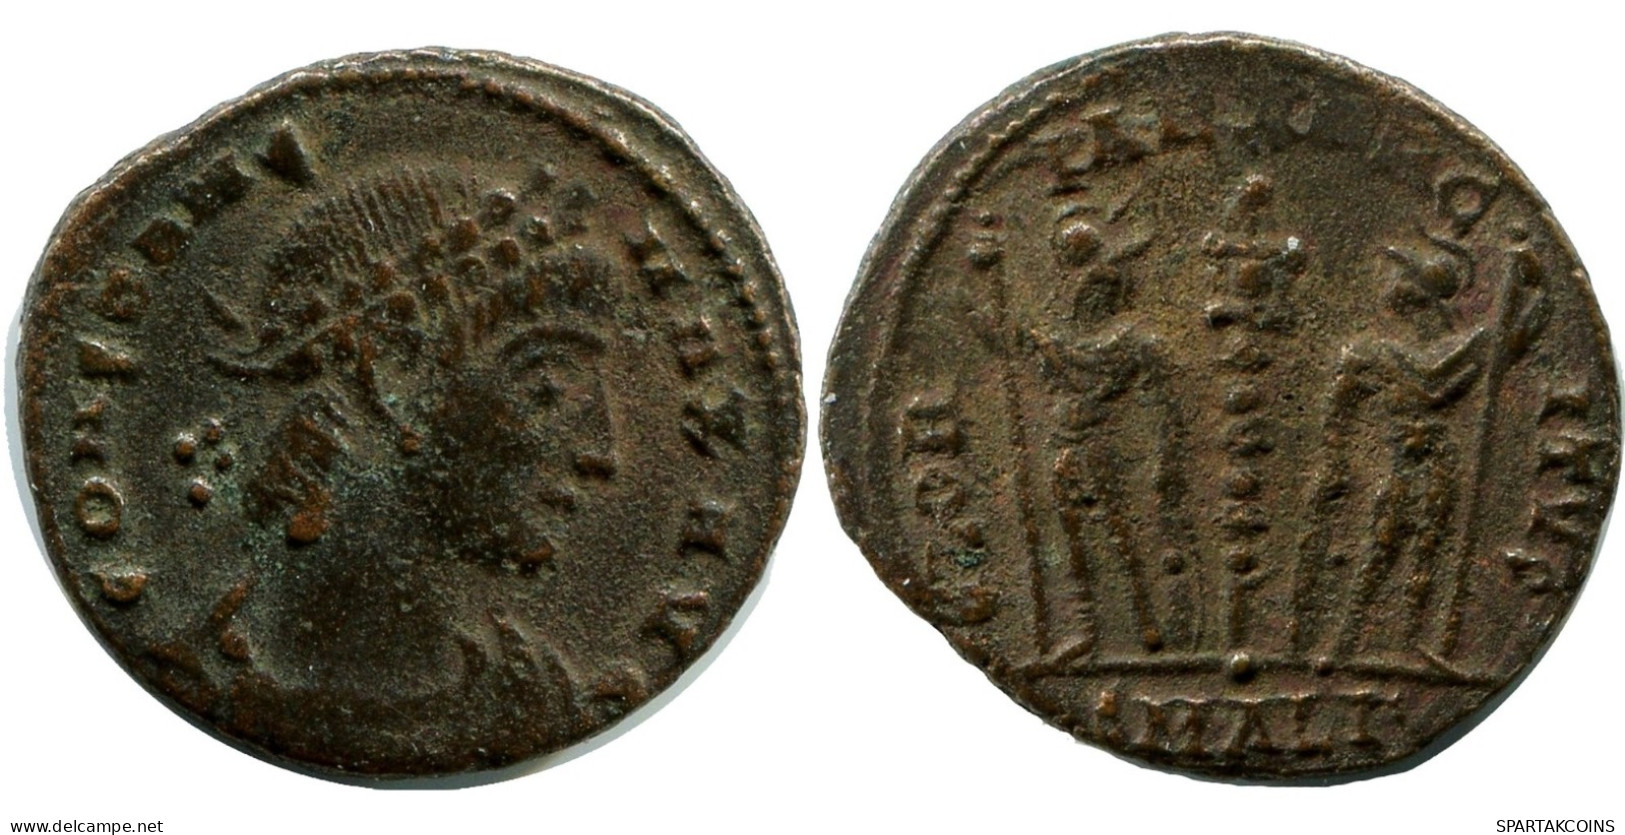 CONSTANS MINTED IN ALEKSANDRIA FROM THE ROYAL ONTARIO MUSEUM #ANC11430.14.D.A - El Imperio Christiano (307 / 363)